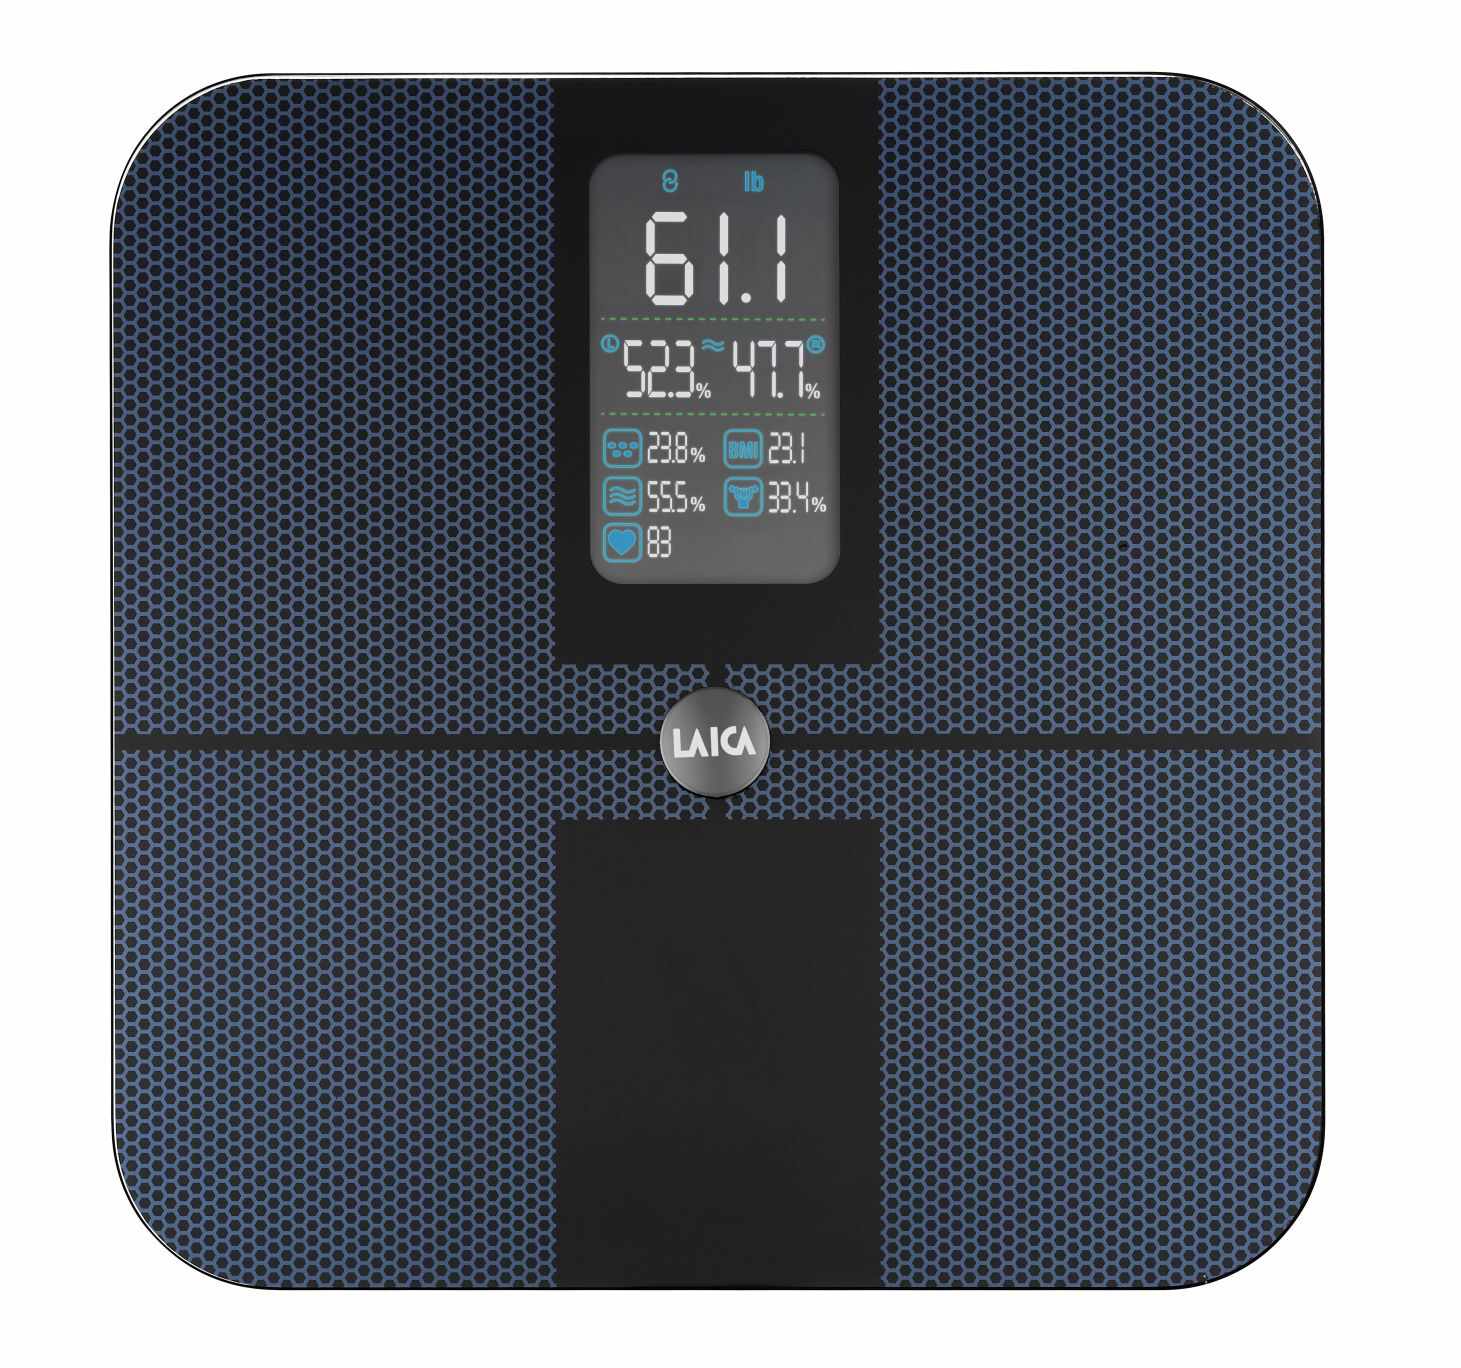 Someday Stressful Accidental NOU: Cantar Smart Body Composition Laica PS7020 - 11 produse